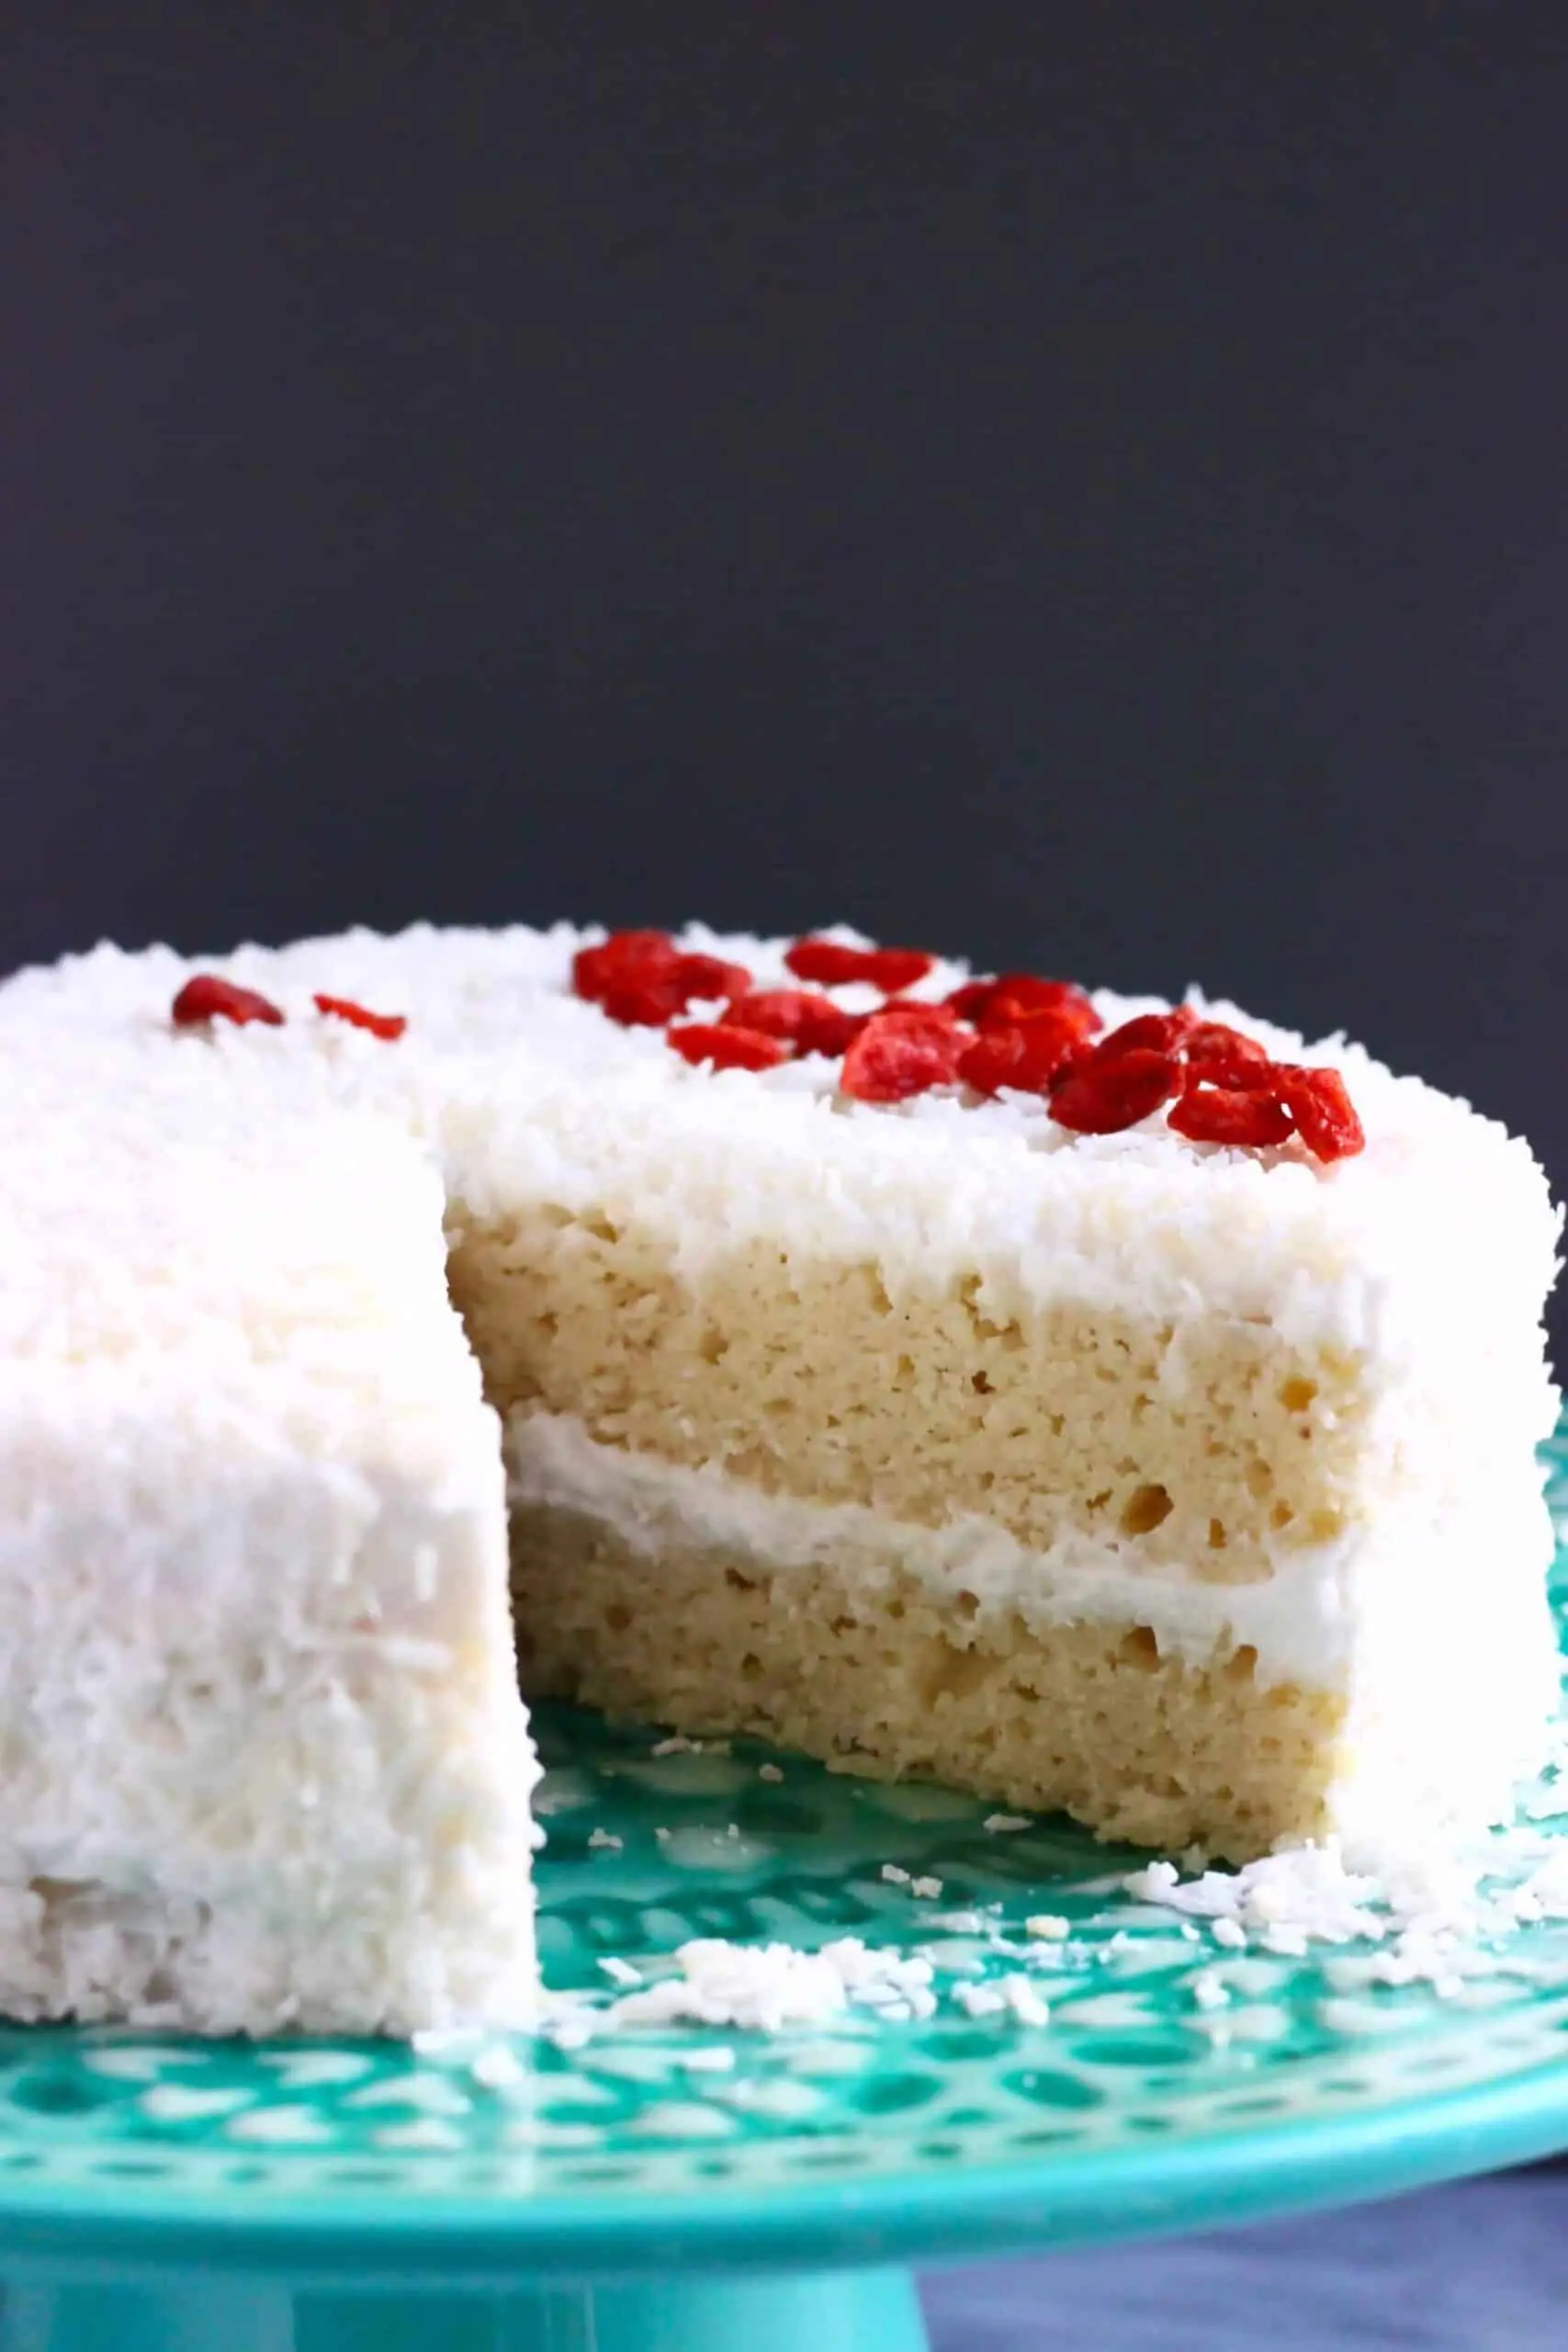 Photo of a white sponge cake covered in creamy frosting and coconut sprinkled with red goji berries against a dark grey background